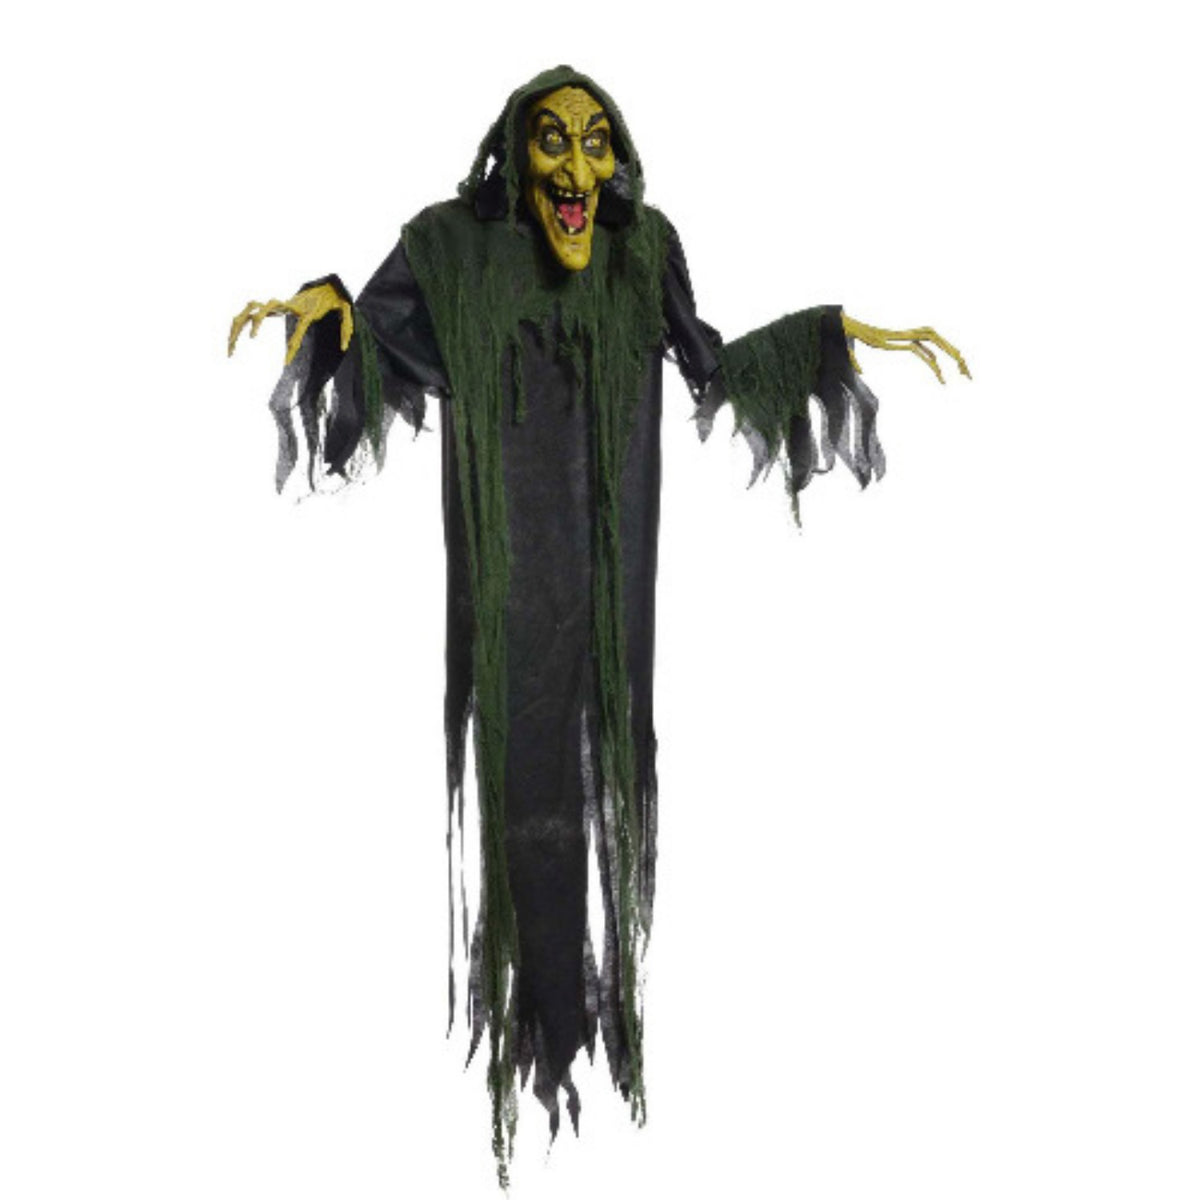 72" Hanging Witch Animated Prop